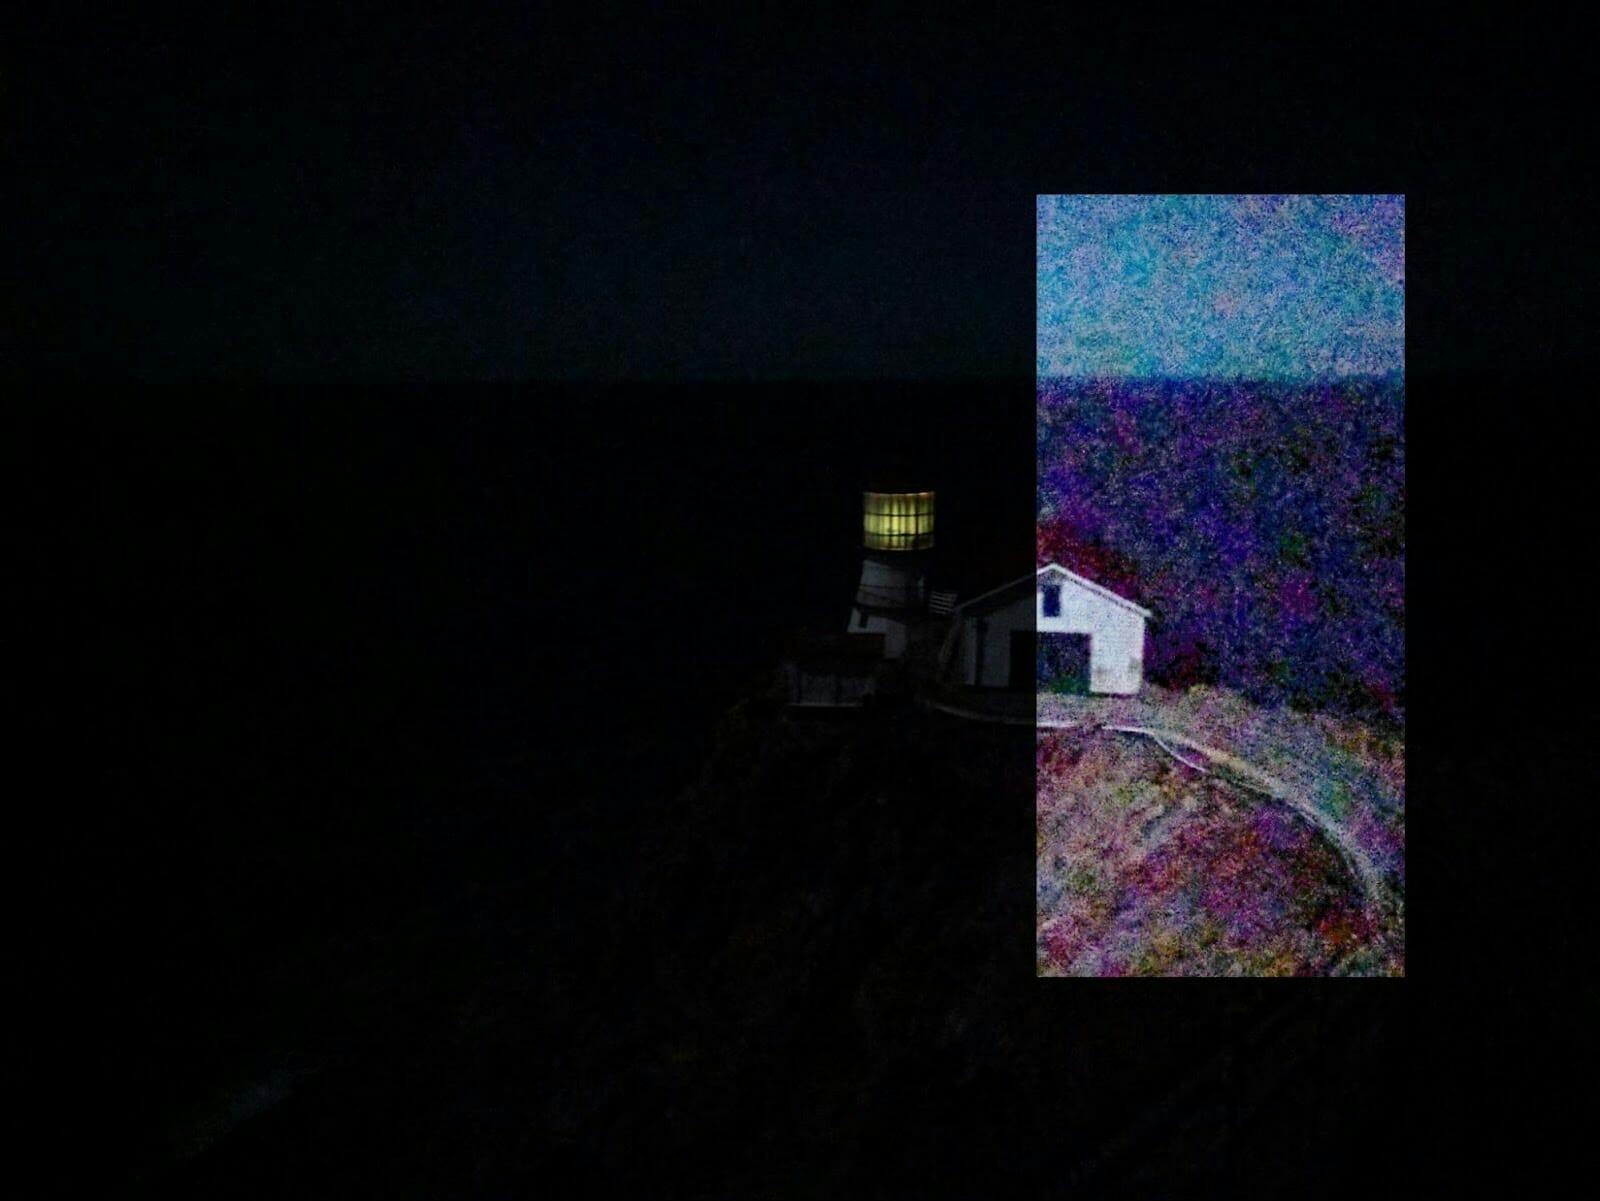 google research low-light nighttime photography image